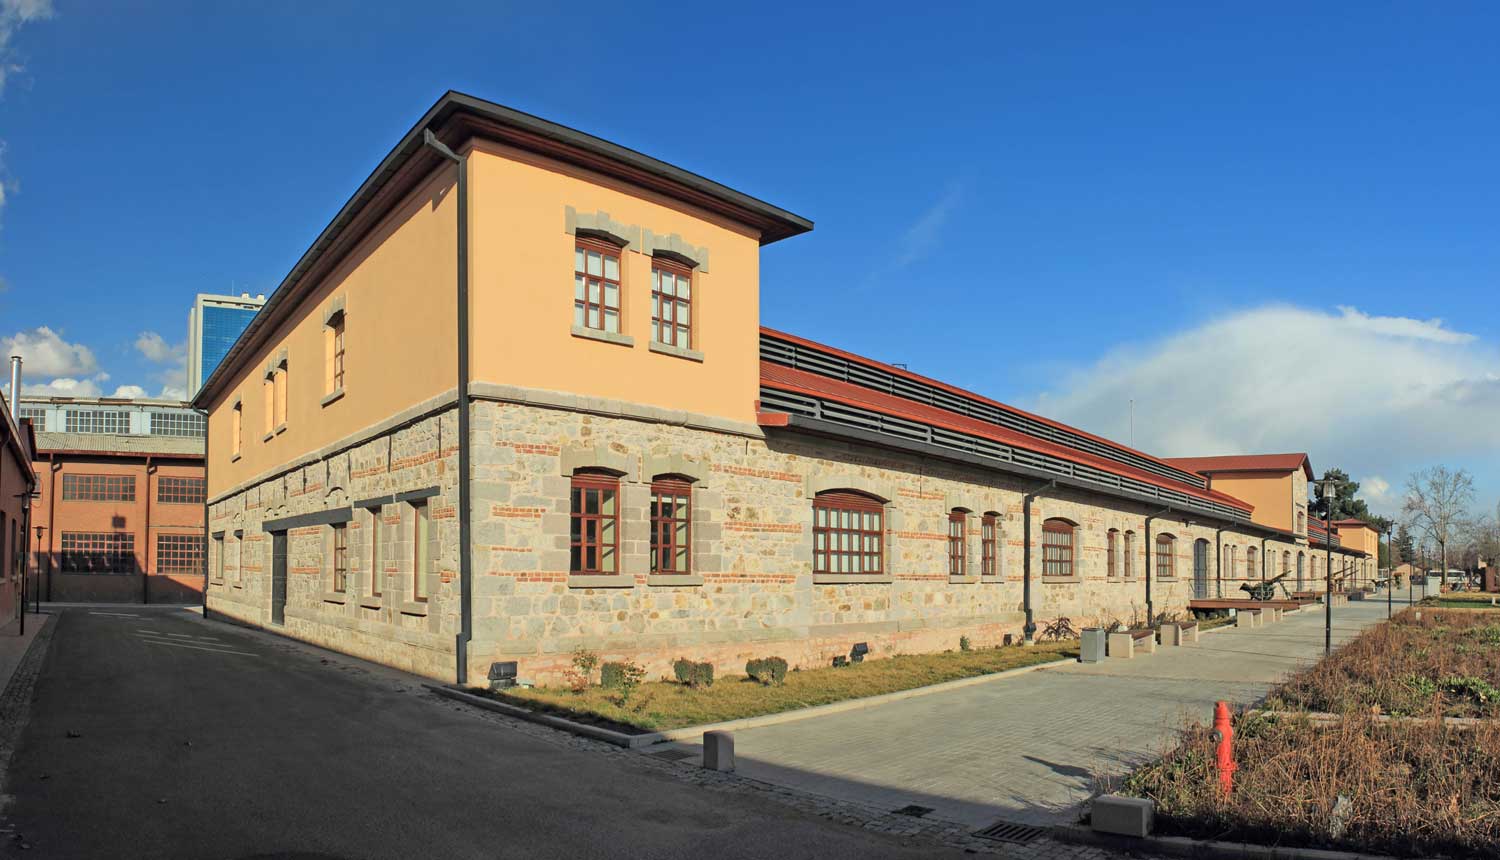 Exterior view of the Turkish Mechanical and Chemical Cooperation Industry and Technology Museum.